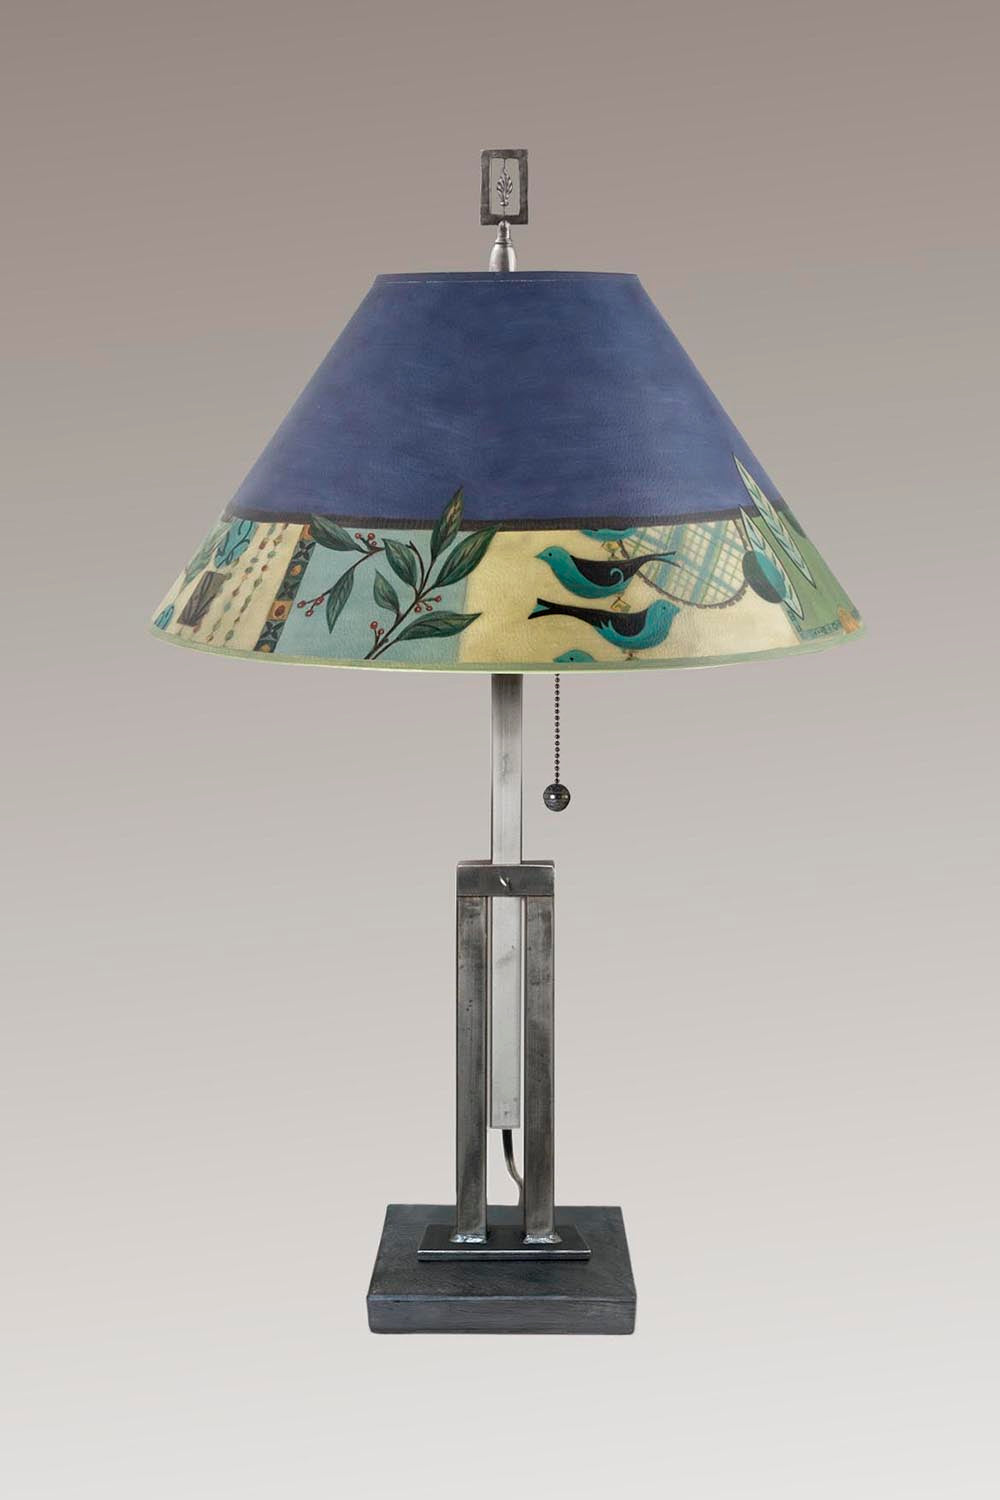 Adjustable-Height Steel Table Lamp with Large Conical Shade in New Capri Periwinkle